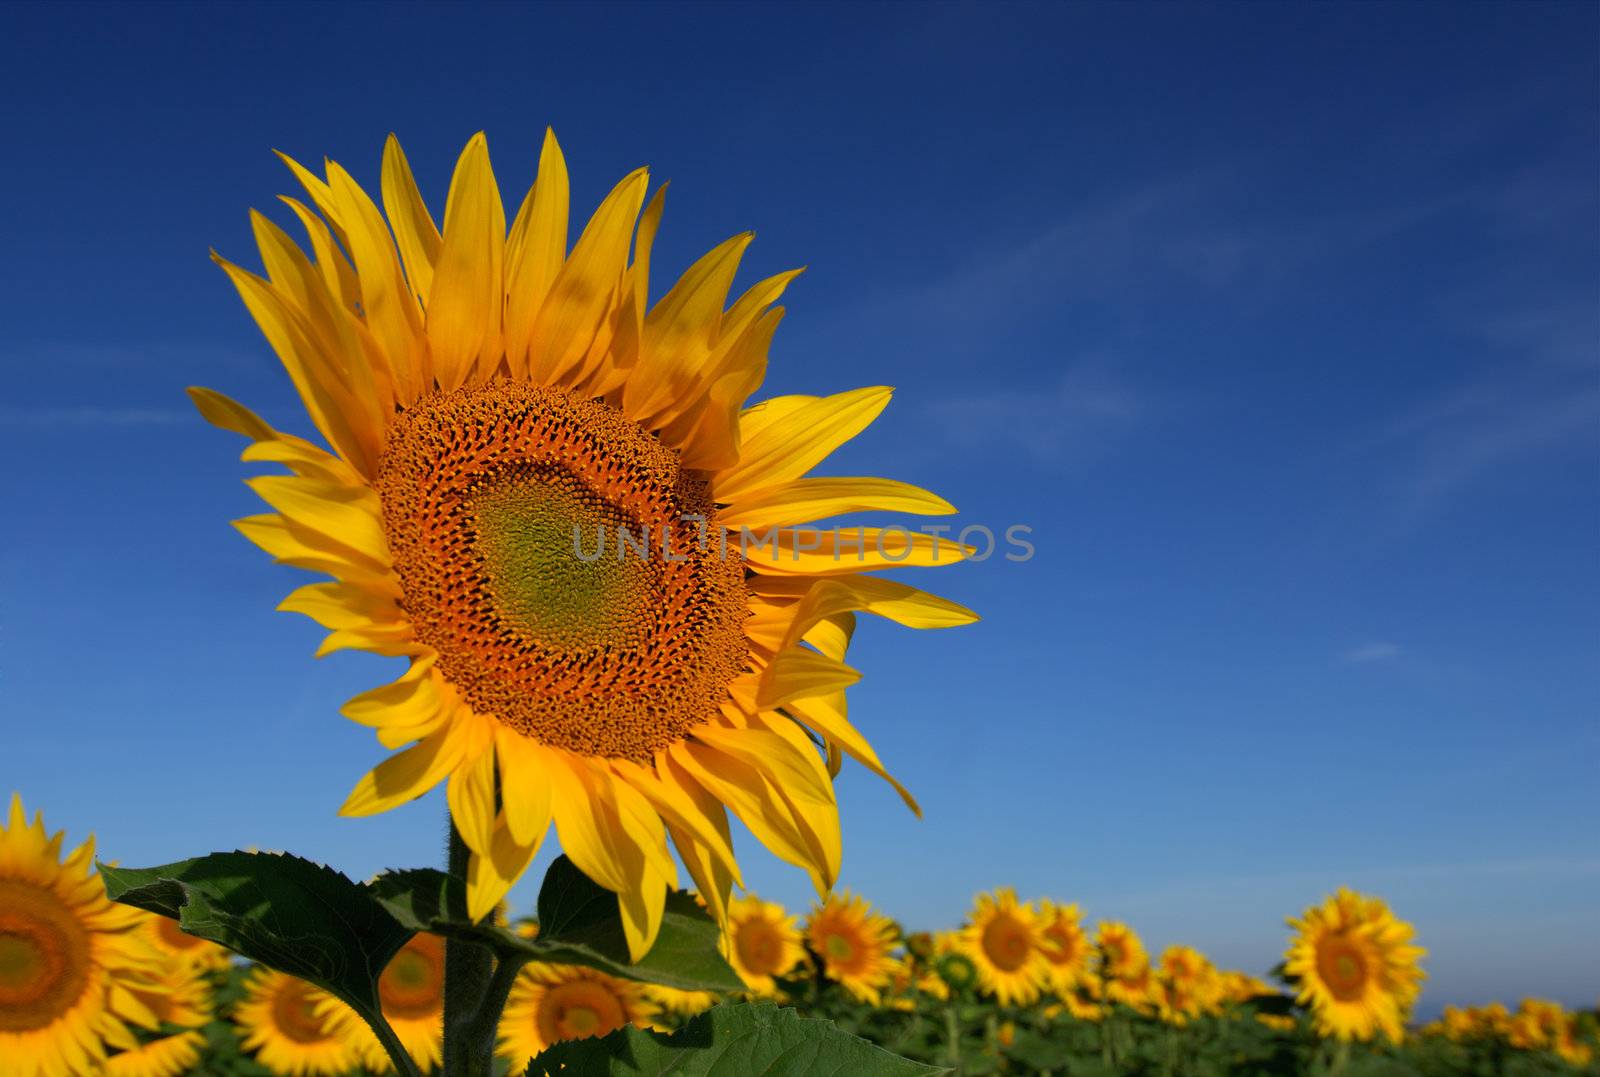 Image shows a sunflower standing above the rest in a field under a clear blue morning sky